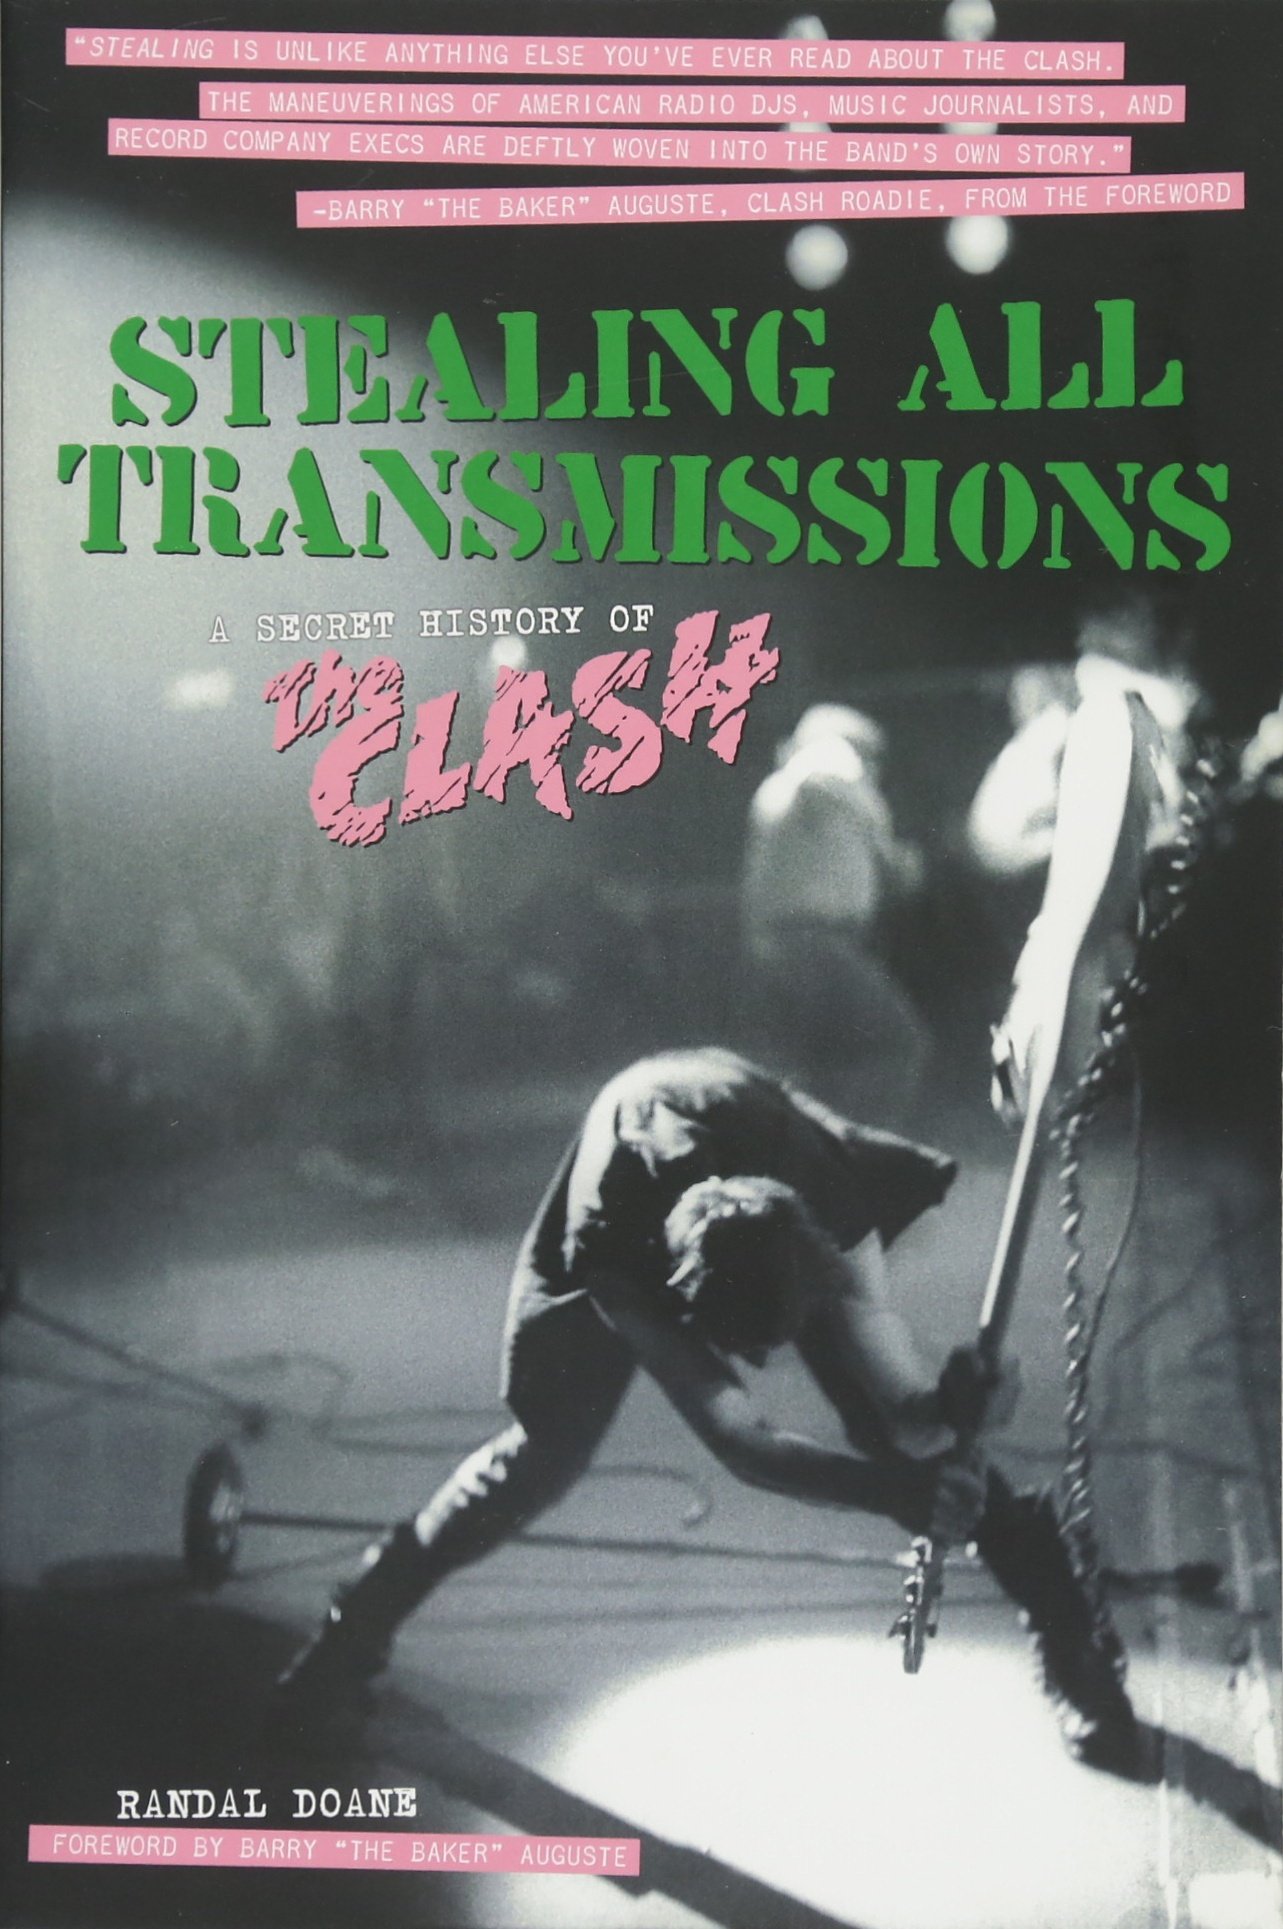 Stealing All Transmissions: A Secret History of the Clash